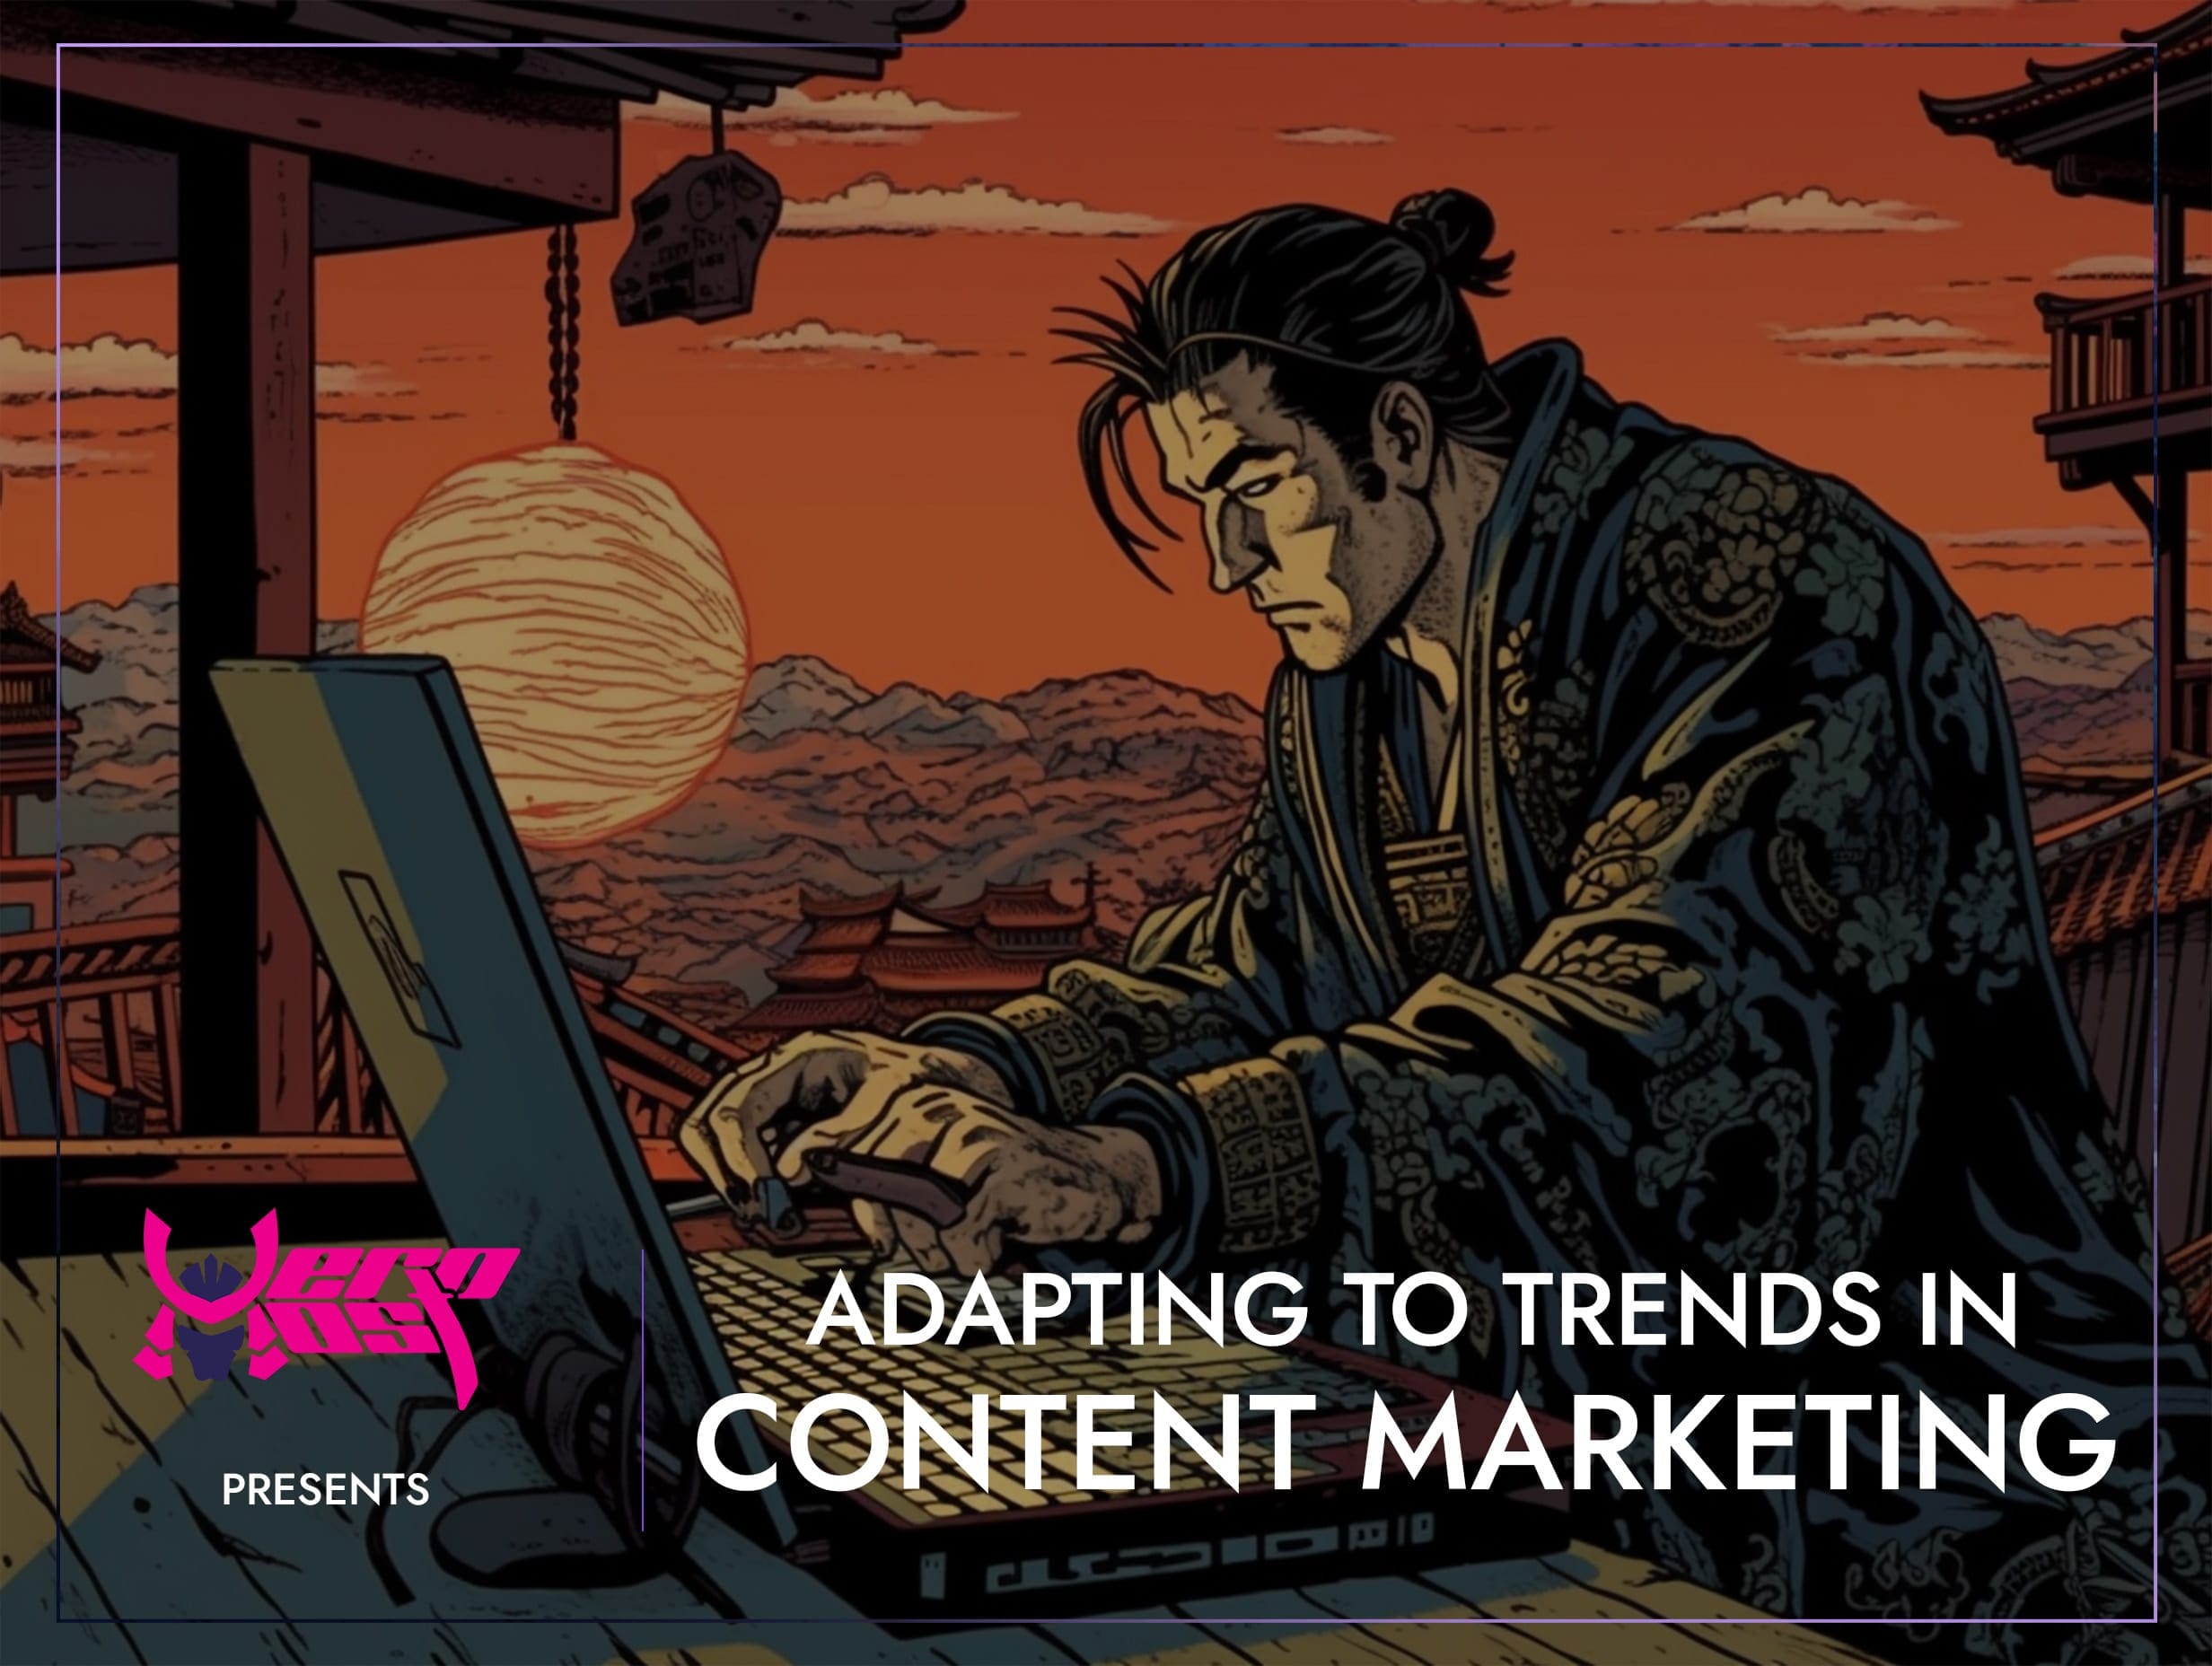 Adapting to content marketing trends